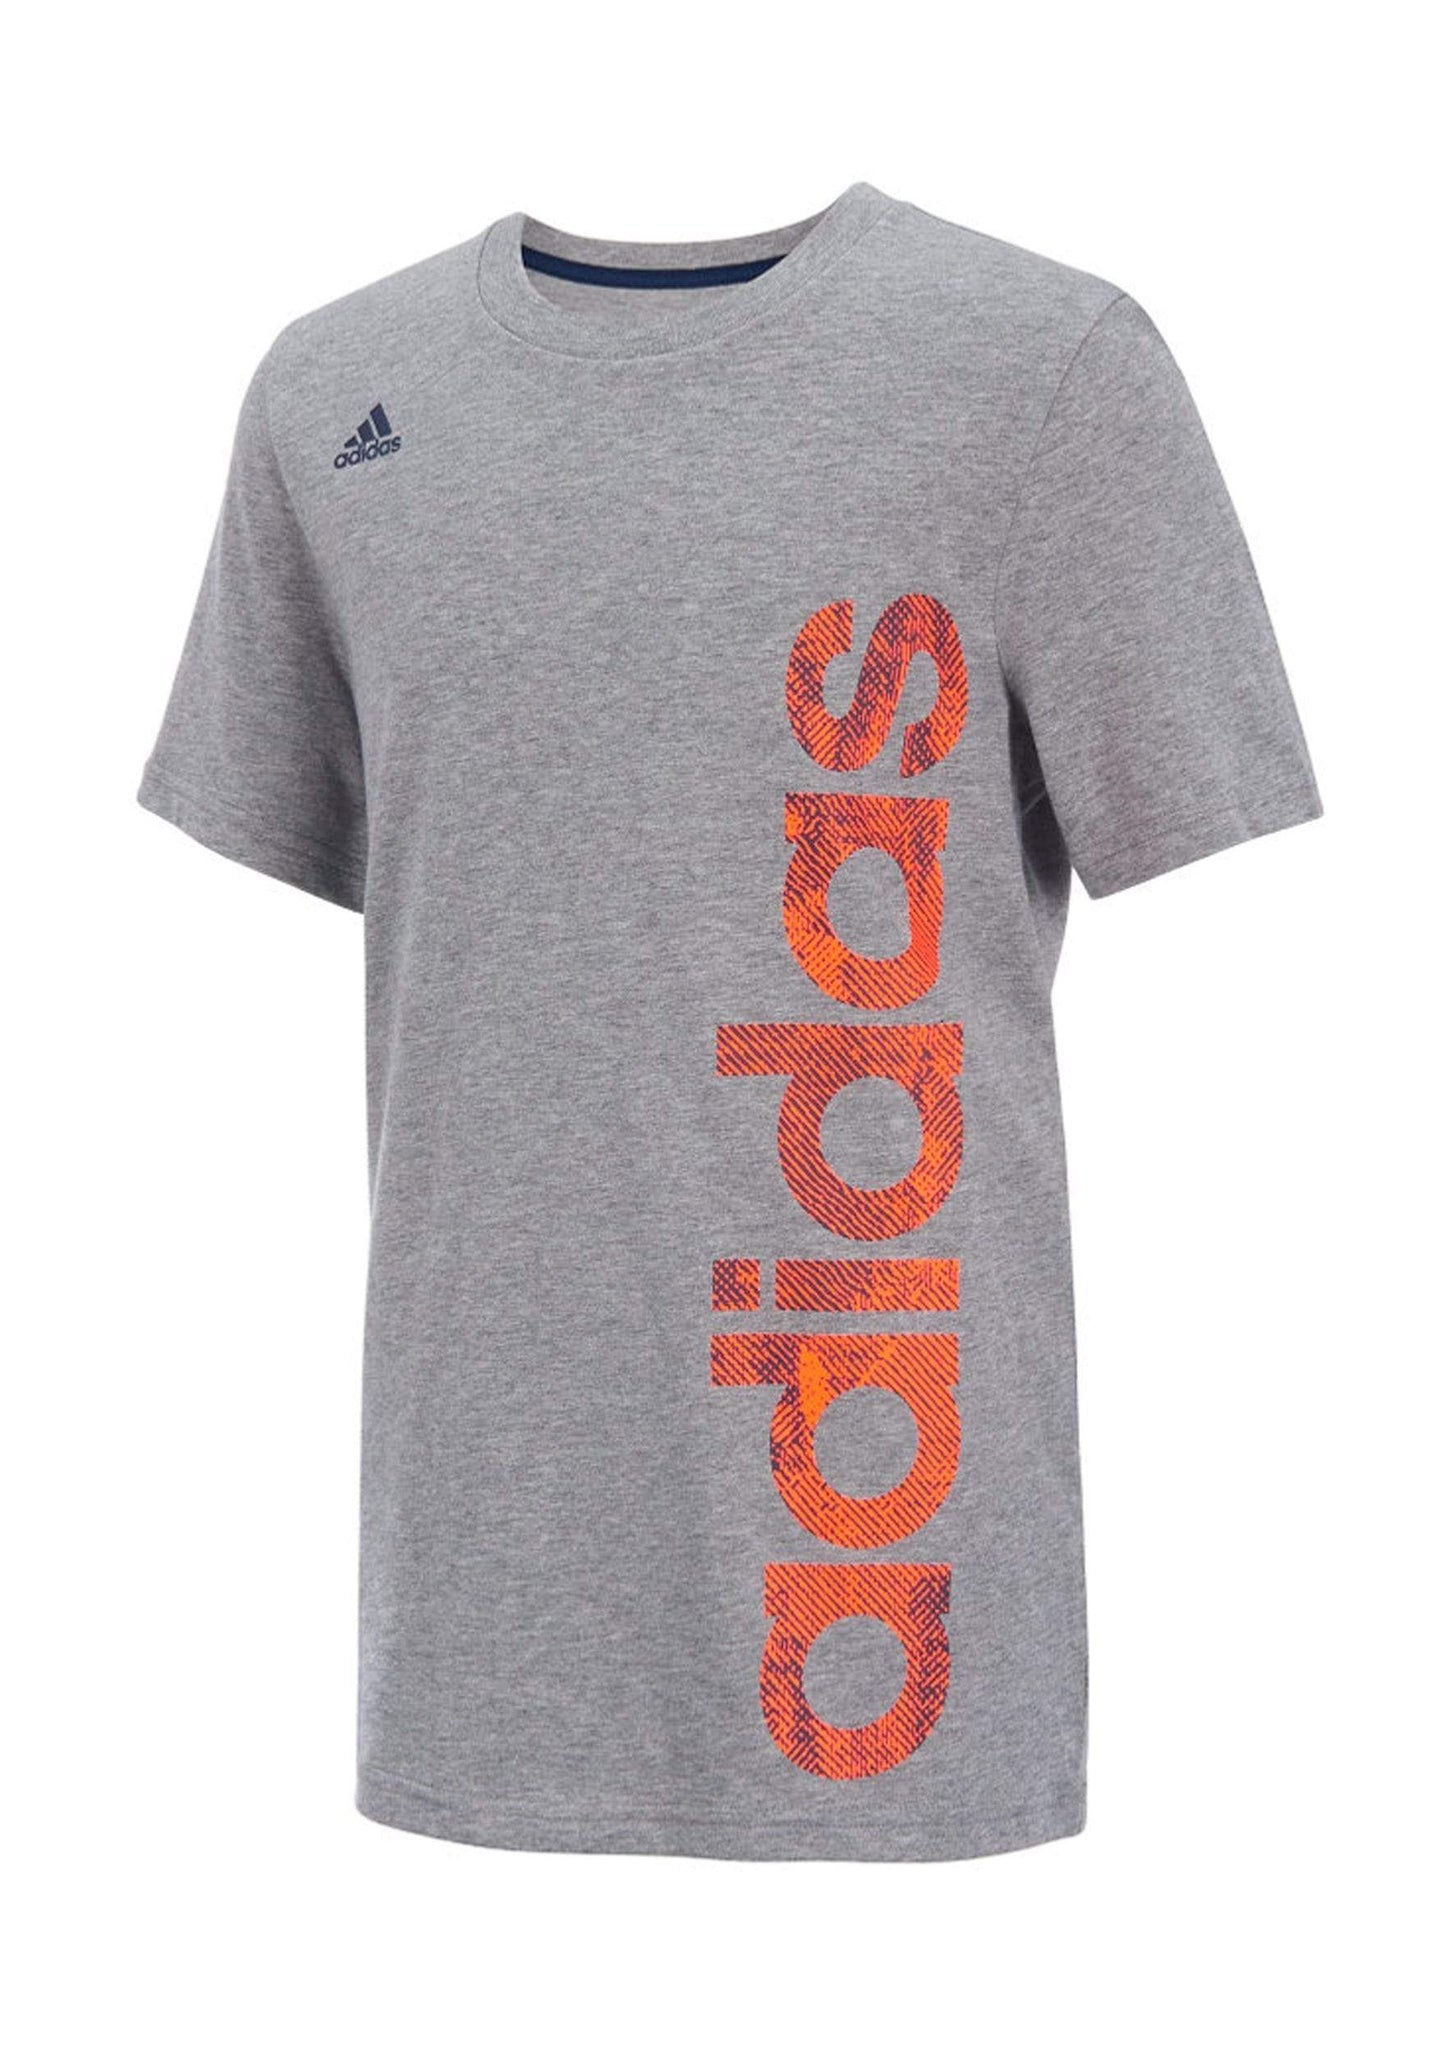 Adidas Apparel 7 Years Kids - Pullover Crew neck Short sleeves